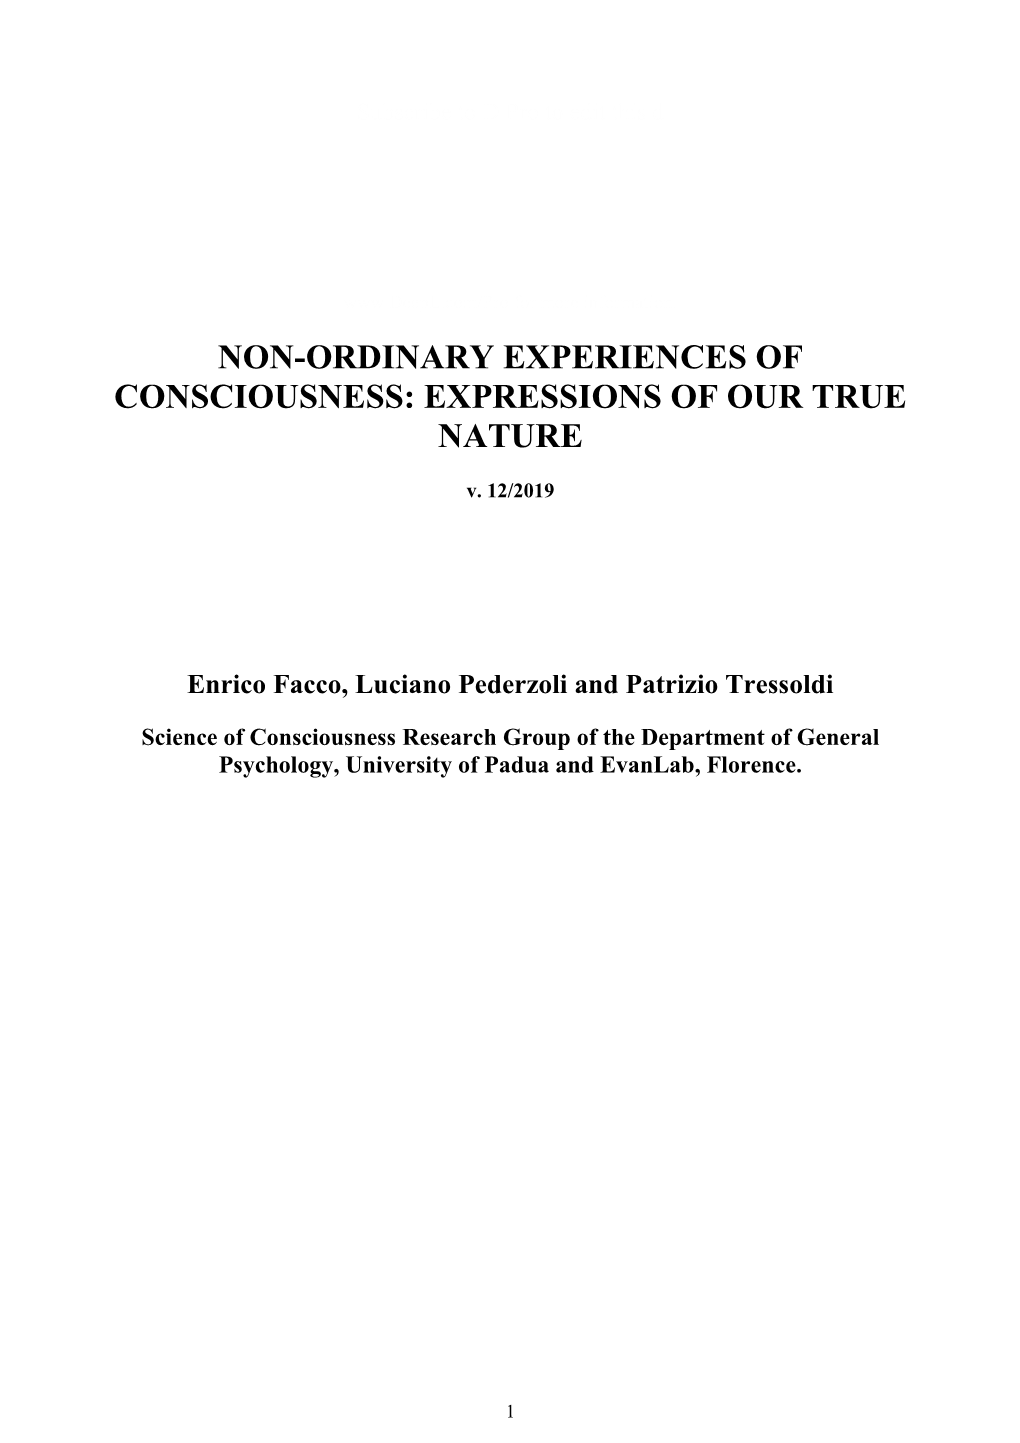 Non-Ordinary Experiences of Consciousness: Expressions of Our True Nature